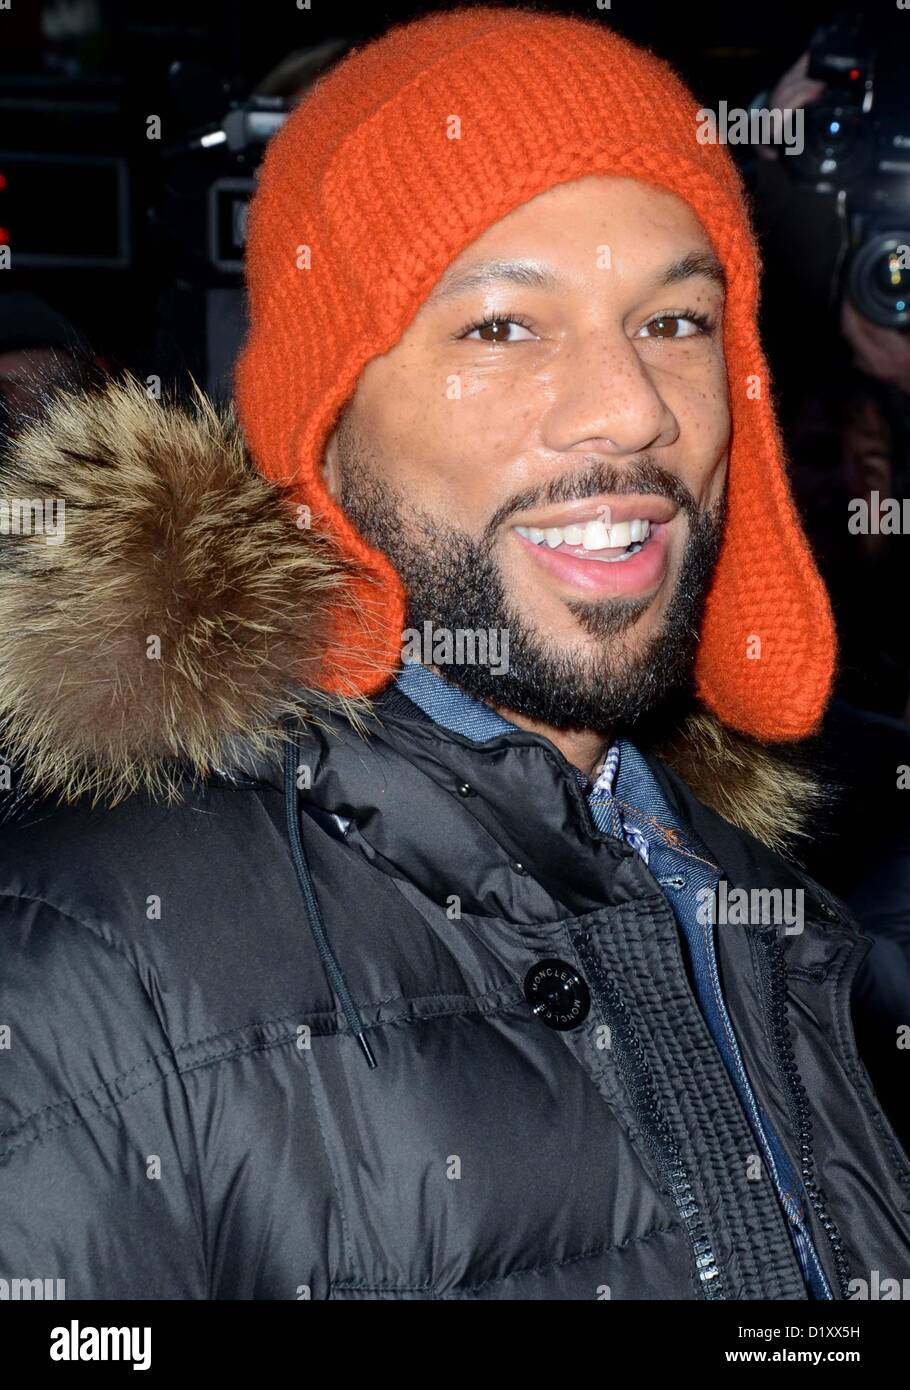 New York, USA. 8th January 2013. Common aka Lonnie Rashid Lynn Jr. at Good Morning America (GMA) out and about for CELEBRITY CANDIDS - TUE, , New York, NY January 8, 2013. Photo By: Derek Storm/Everett Collection/Alamy Live News Stock Photo